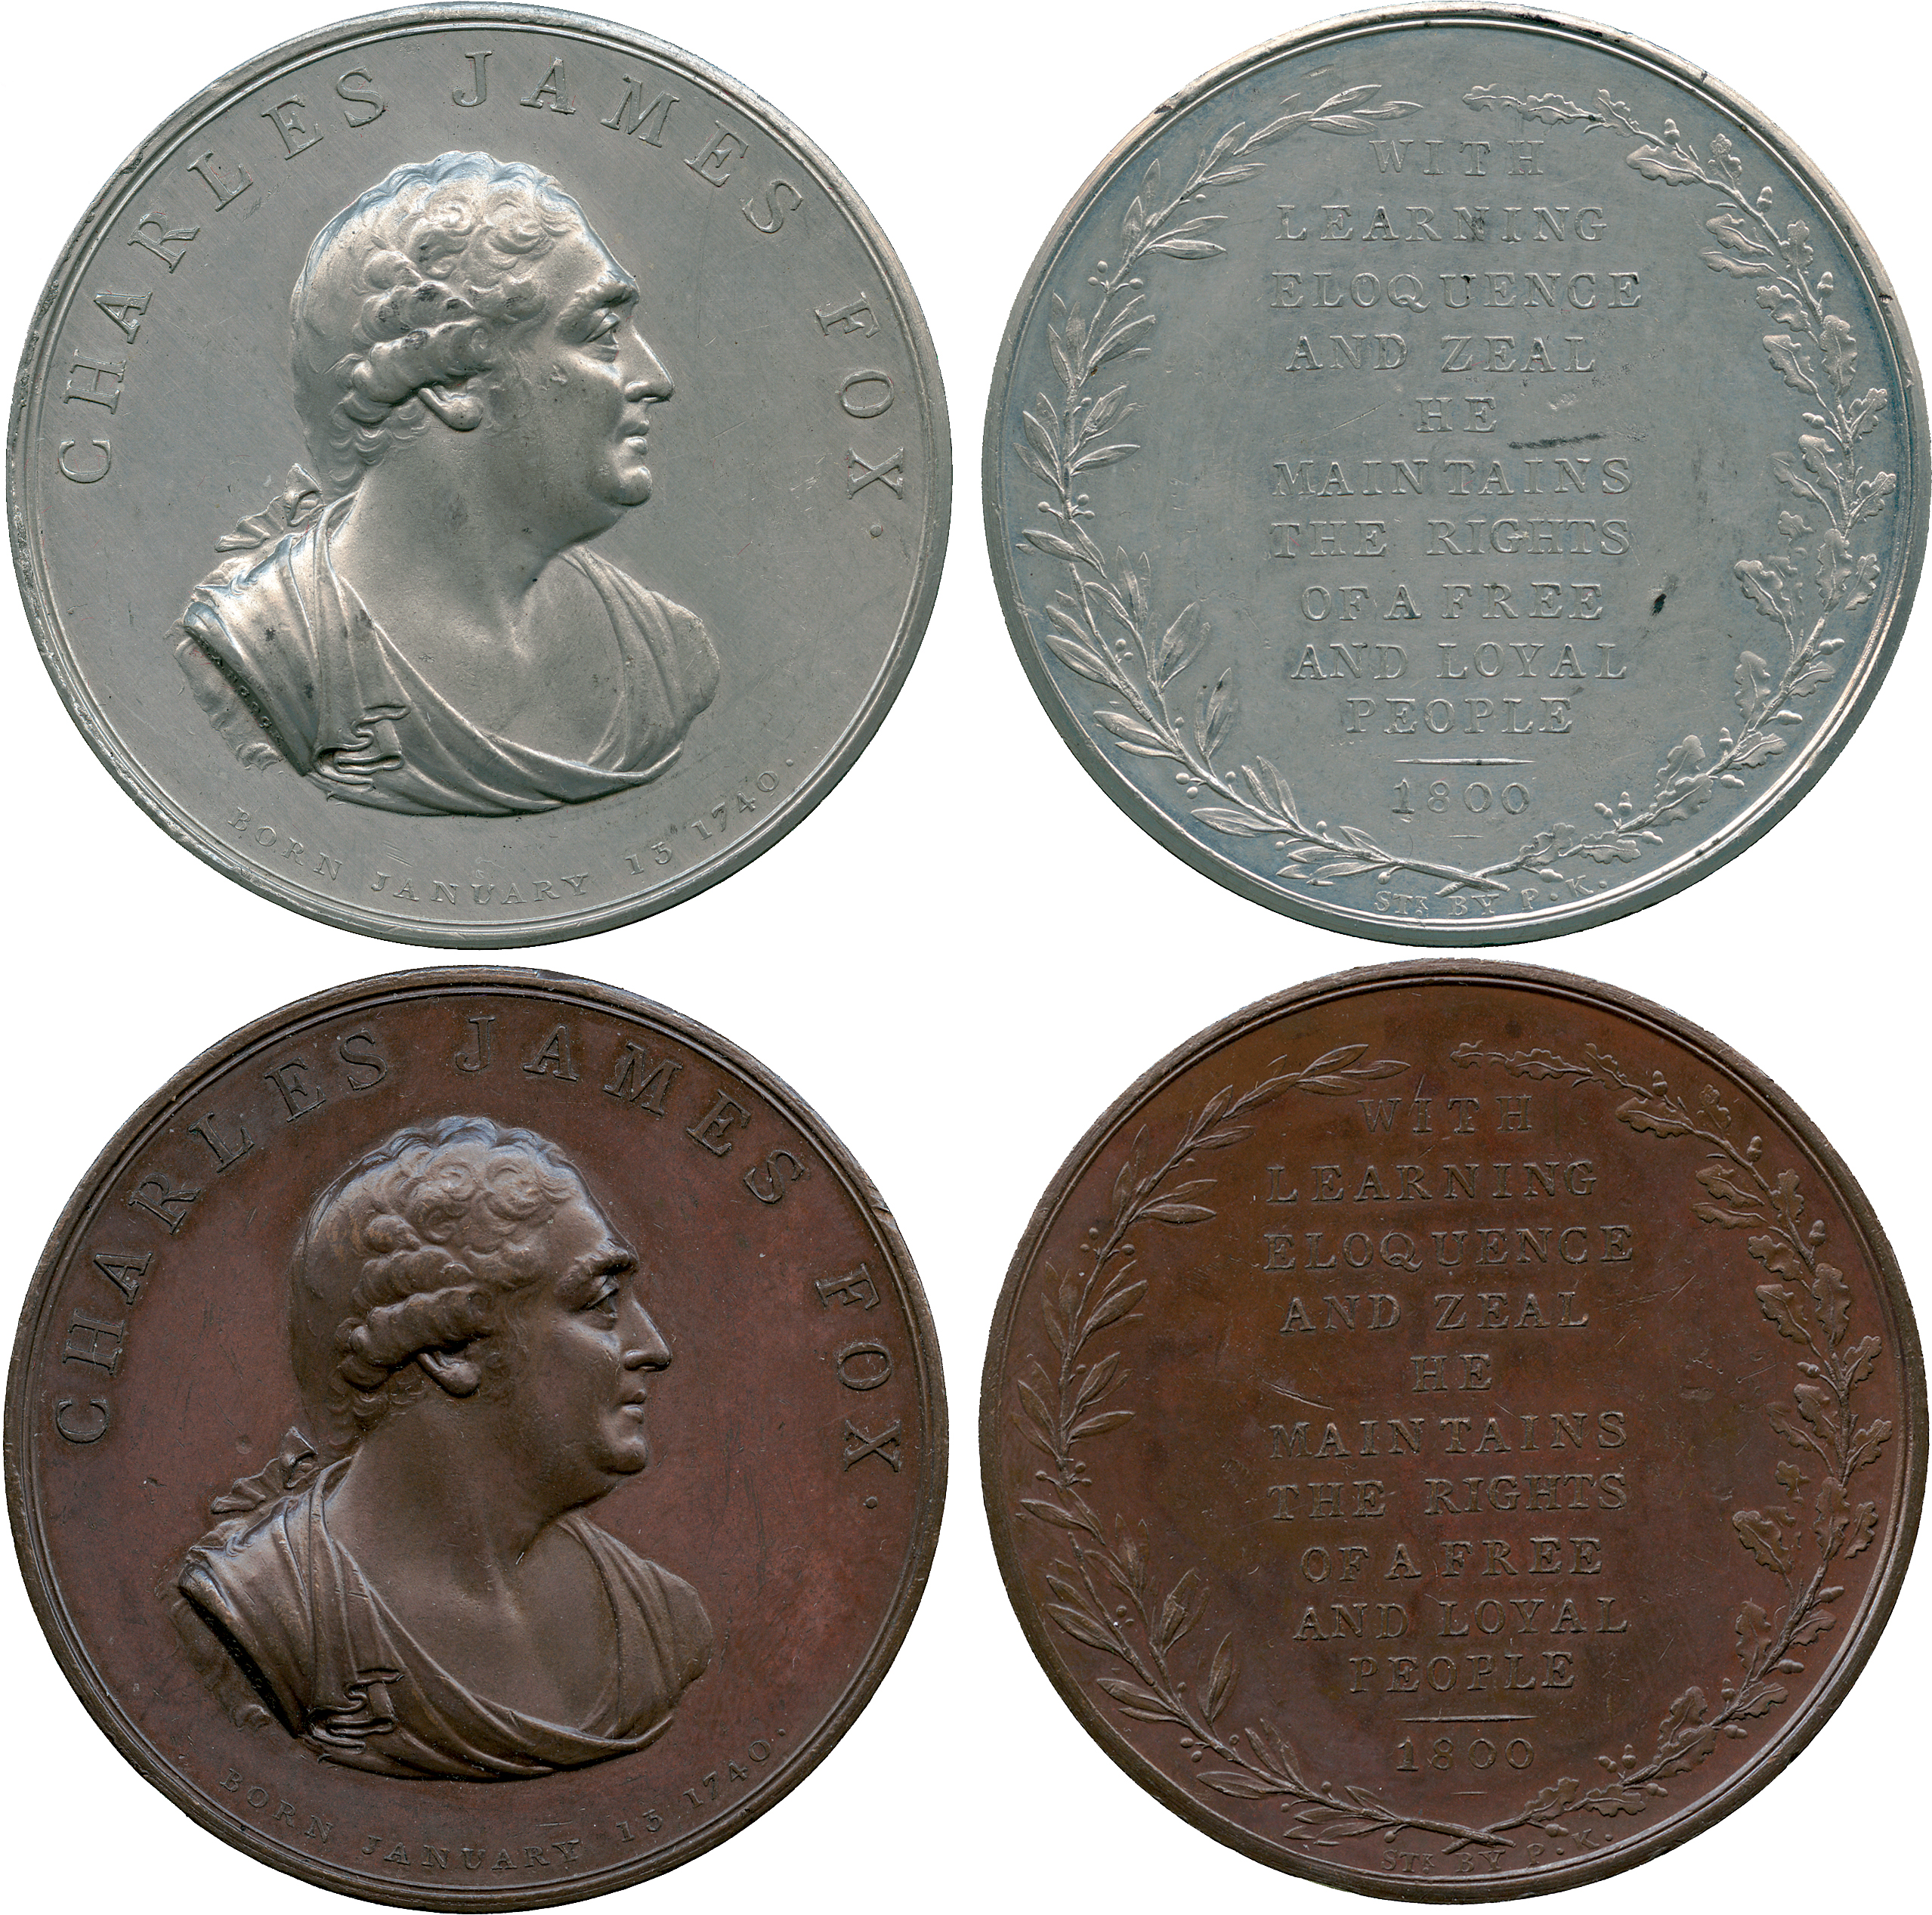 COMMEMORATIVE MEDALS, BRITISH MEDALS, Medals Relating to the Right Honourable Charles James Fox (